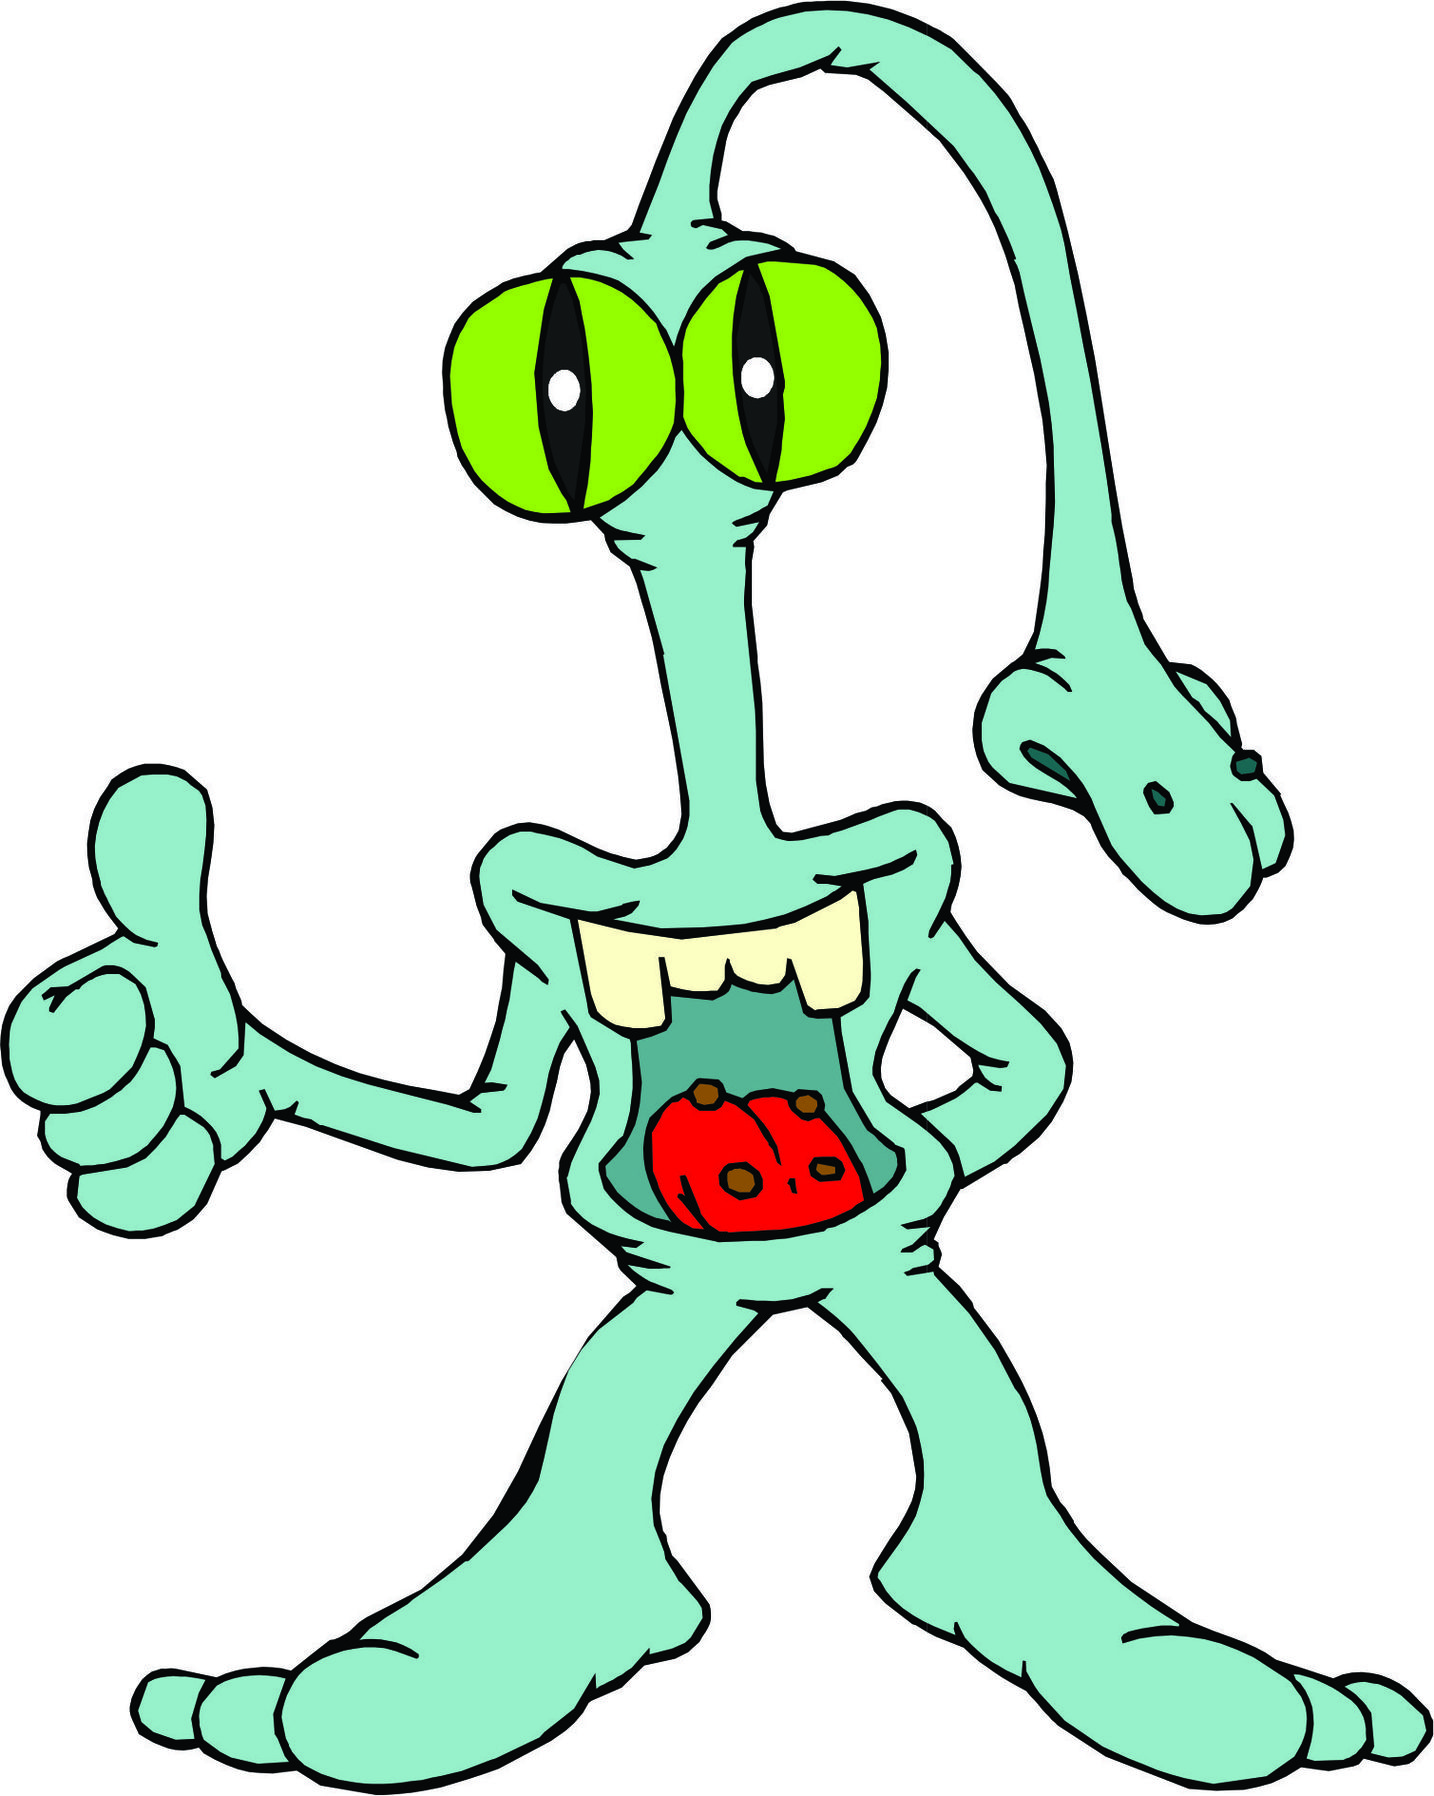 Alien Cartoon Images Clipart - Free to use Clip Art Resource